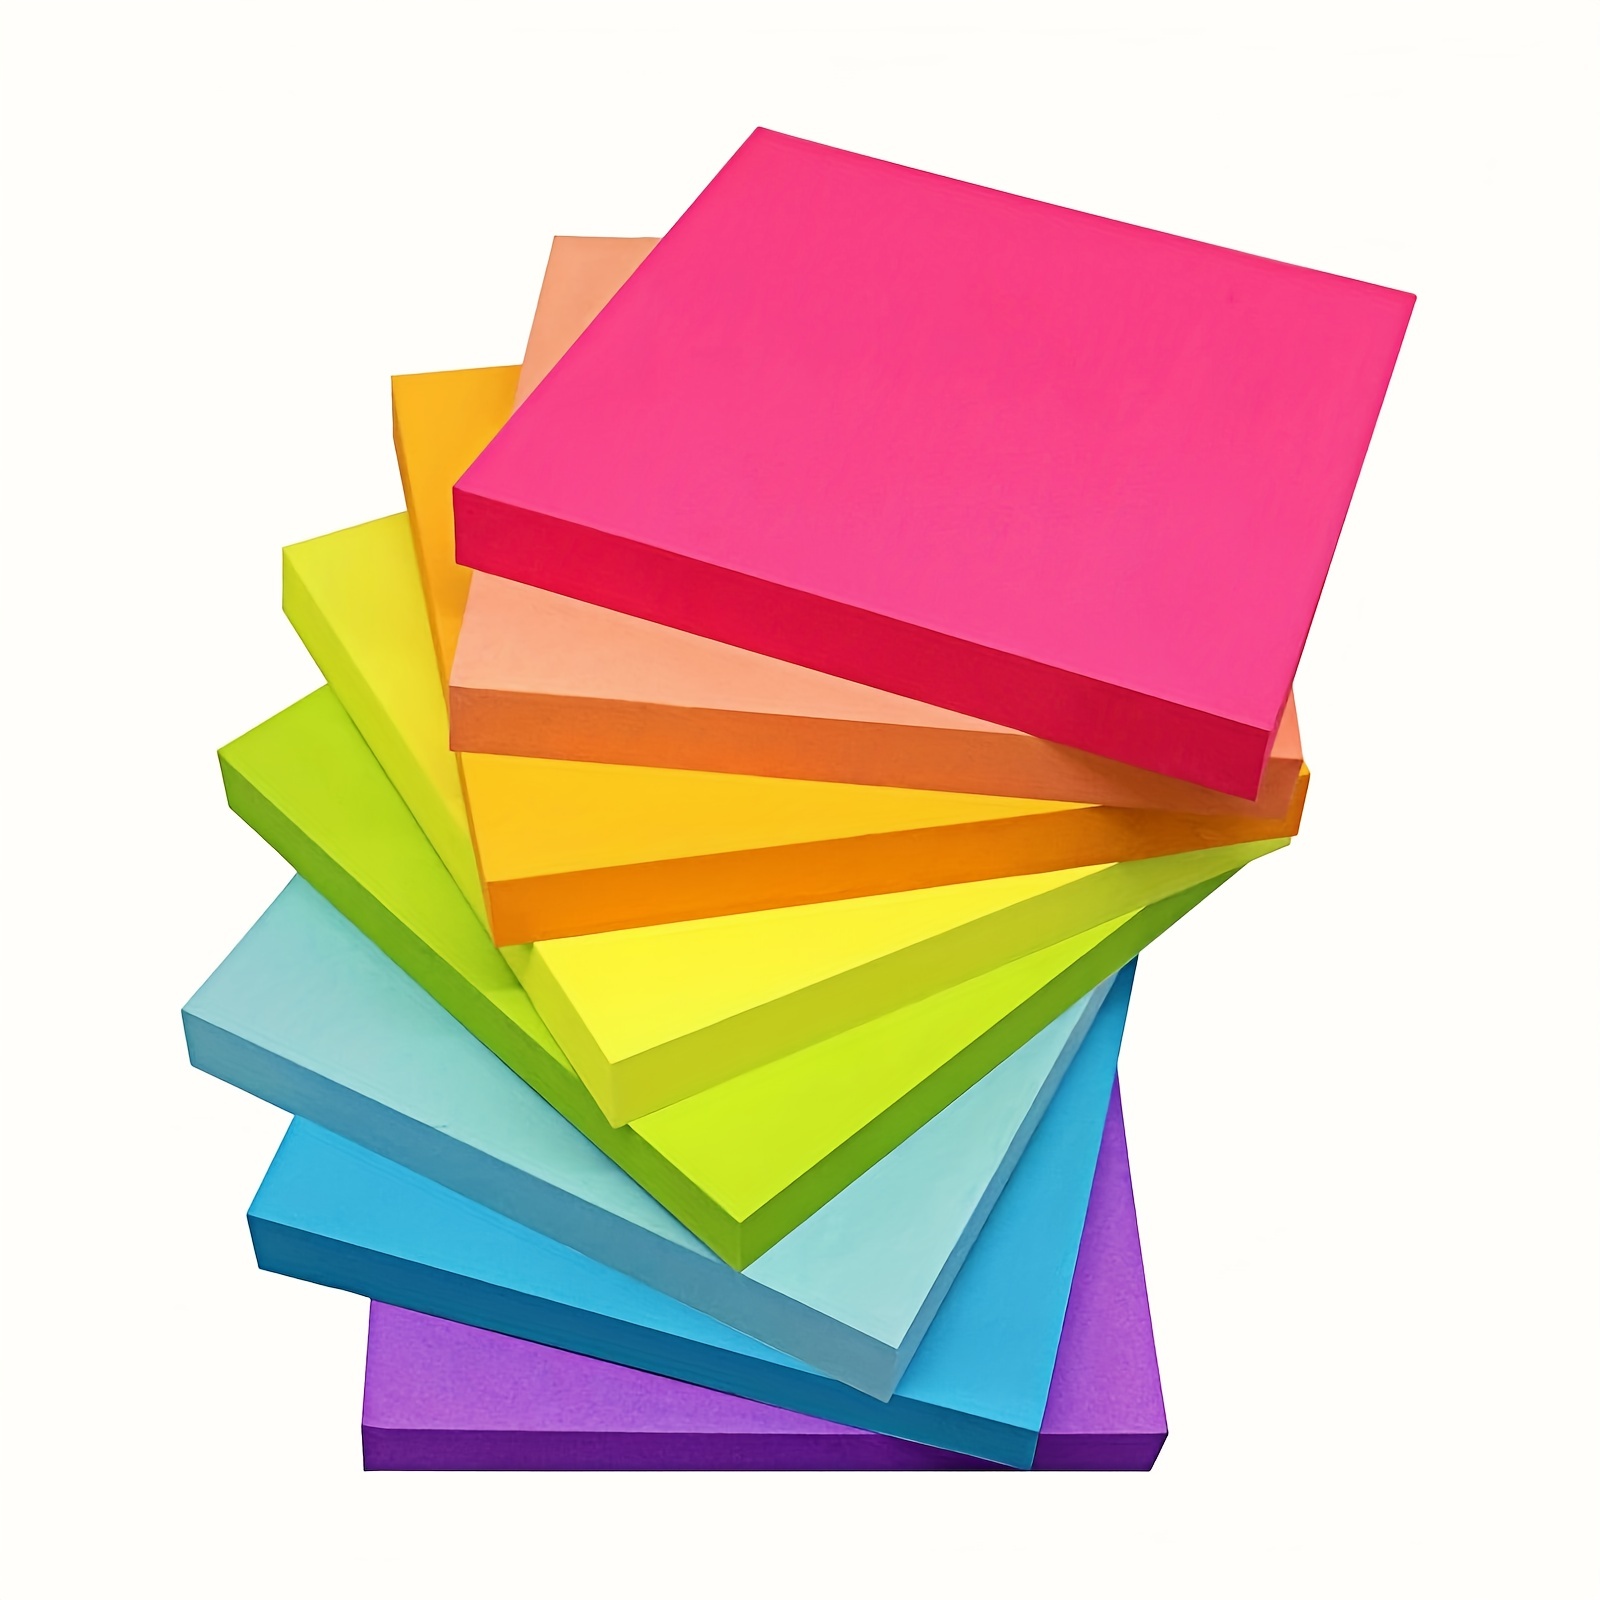 

8 Pads Sticky Notes 3x3 Inches, Bright Colors Self-stick Pads, Easy To Post For Home, Office, Notebook